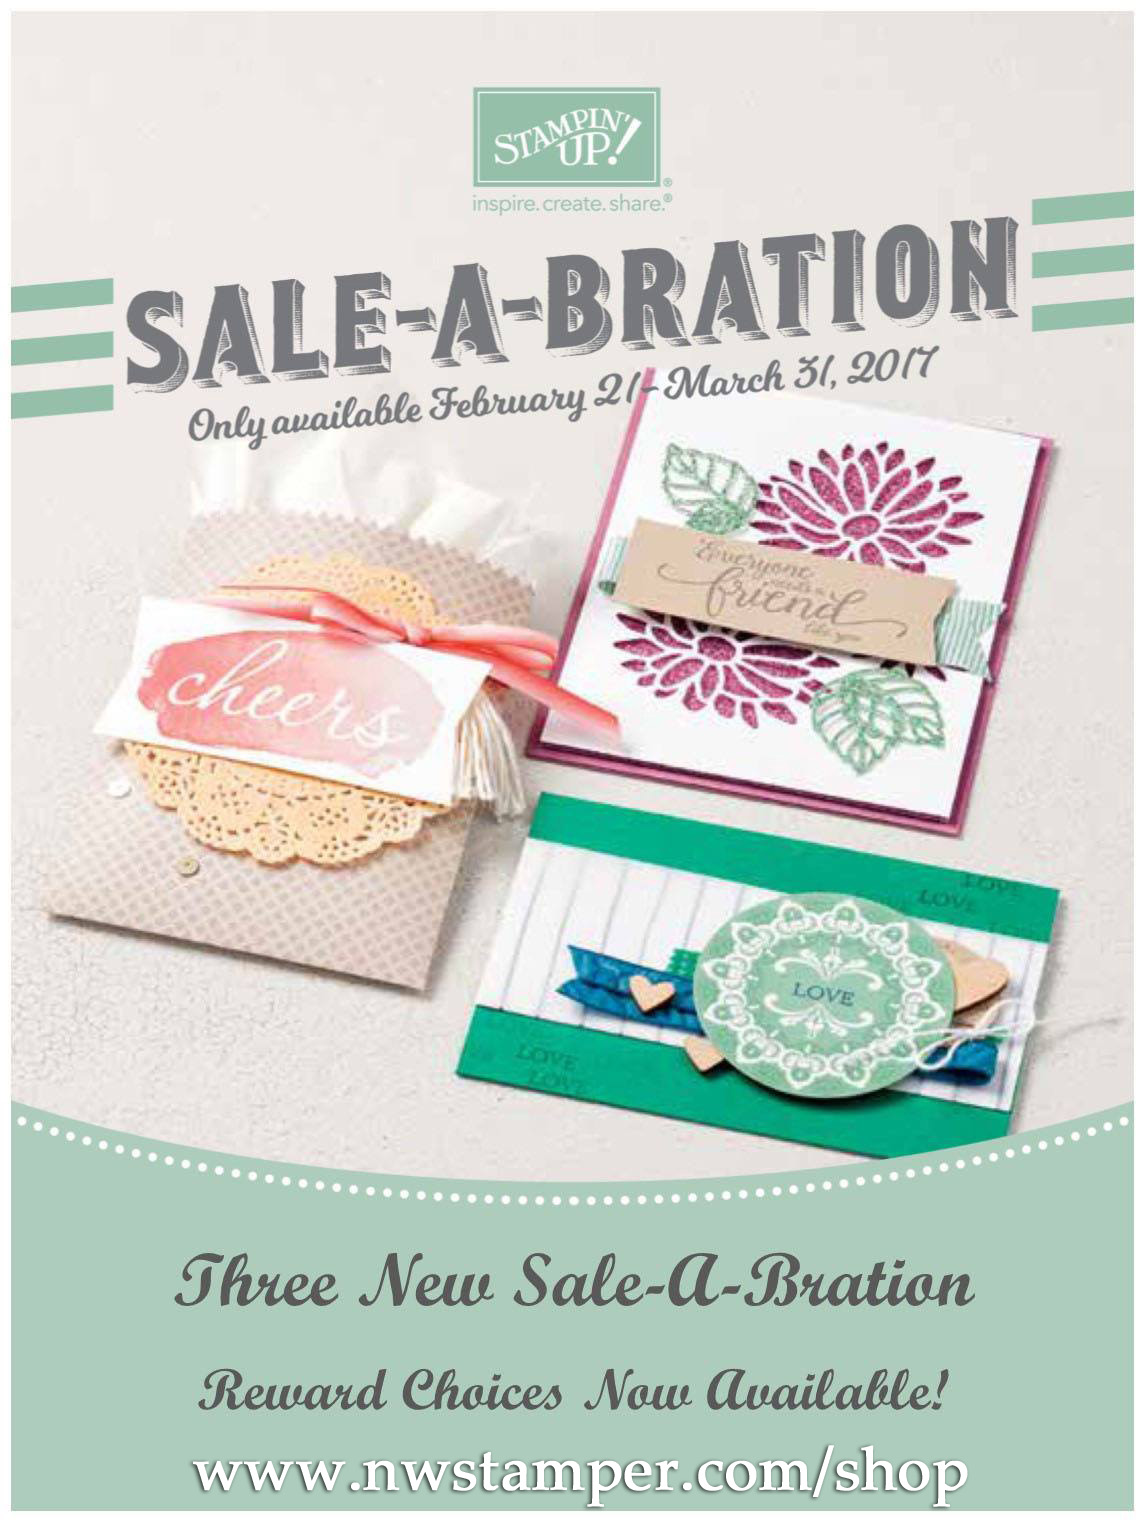 Sale-a-Bration flyer cover with 2017 additional choices on nwstamper.com